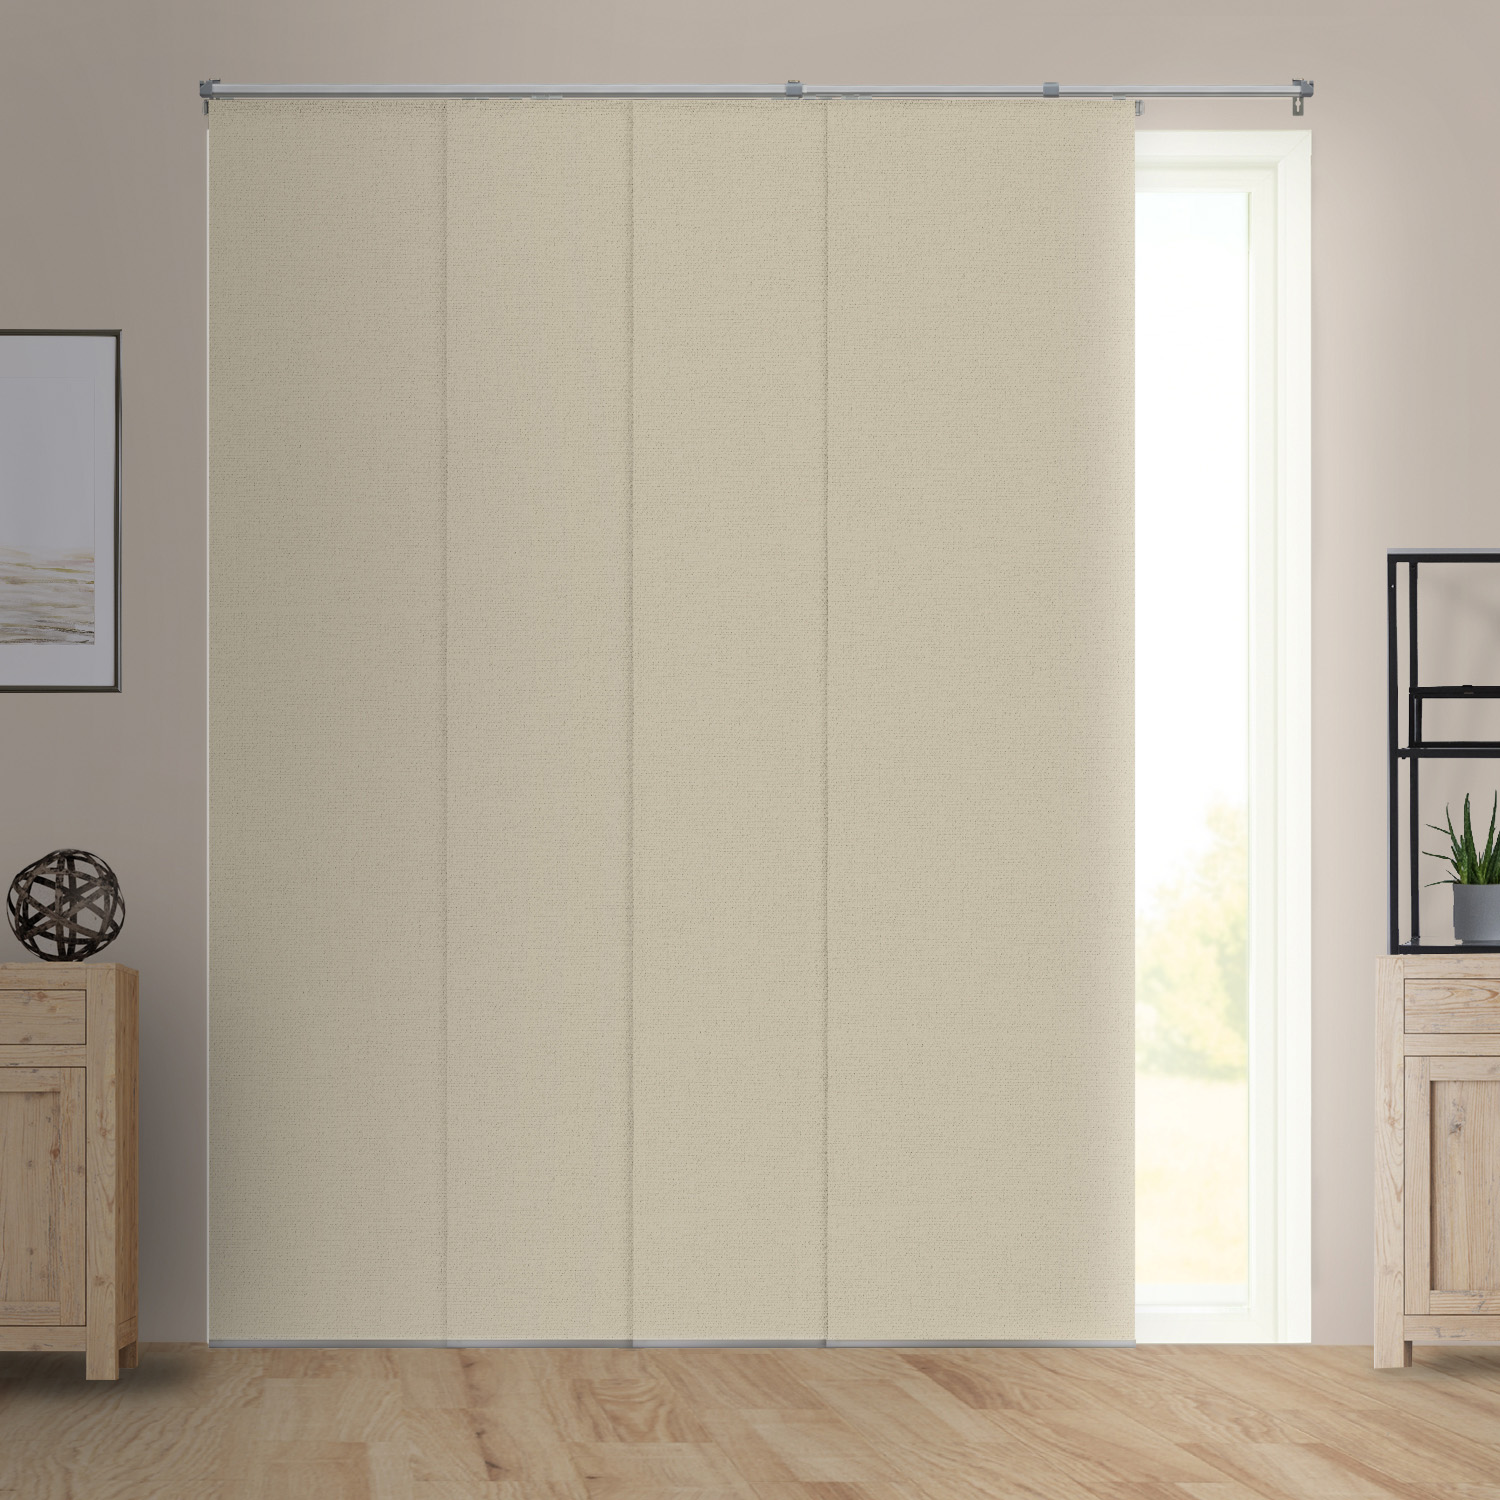 Adjustable Sliding Panels Cut To Length Vertical Blinds Urban White (light Filtering) - Up To 80 In W X 96 In H